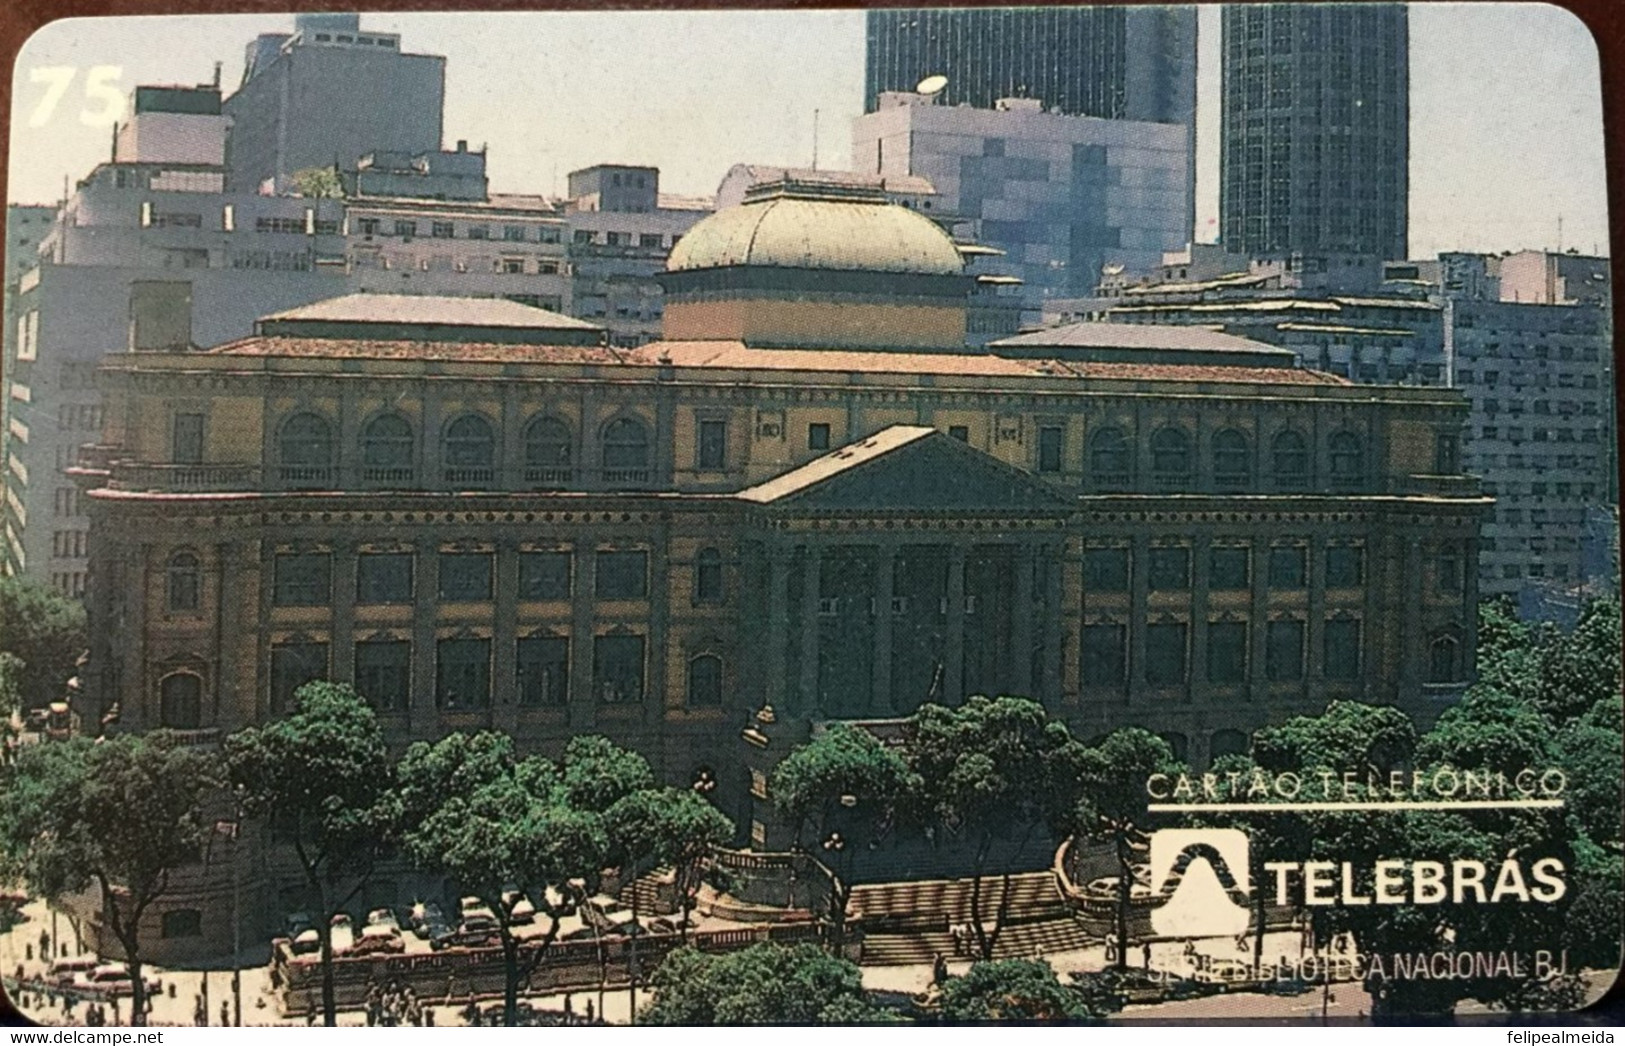 Phone Card Produced By Telebras In 1996 - Series National Library Of Rio De Janeiro - Photo Of The Building Headquarters - Kultur